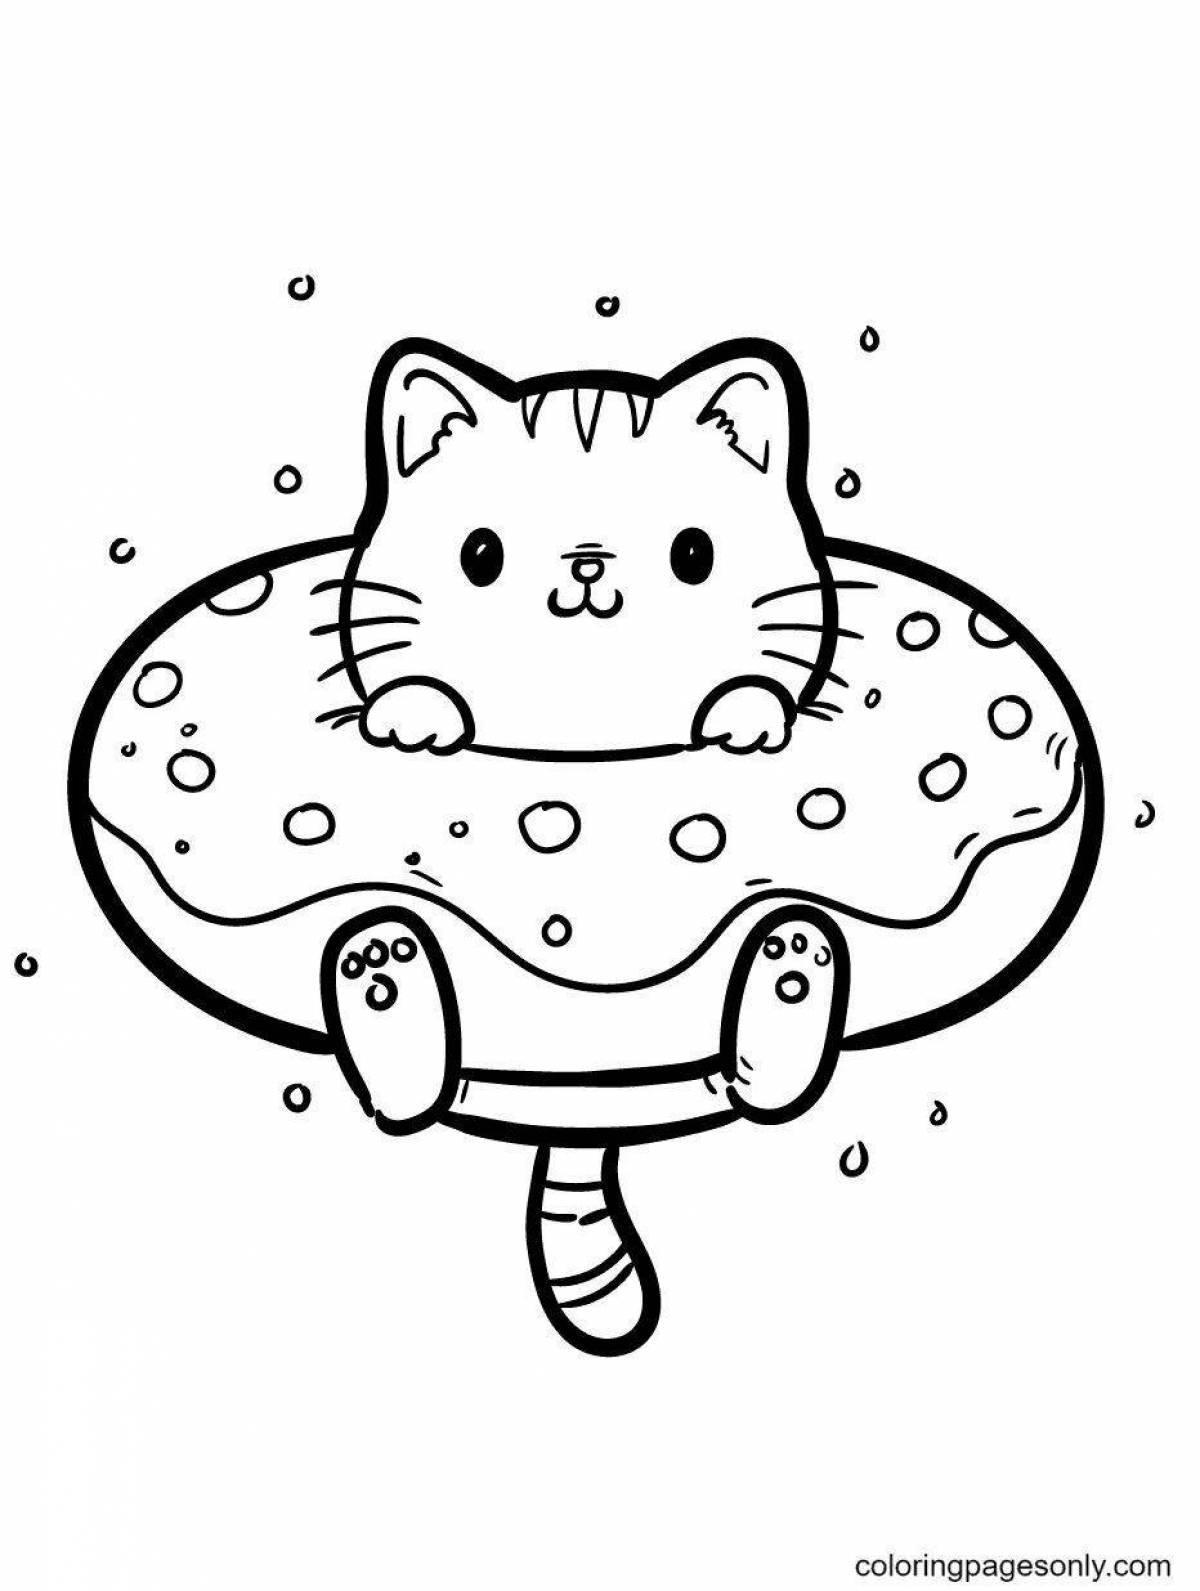 Coloring live cat donut